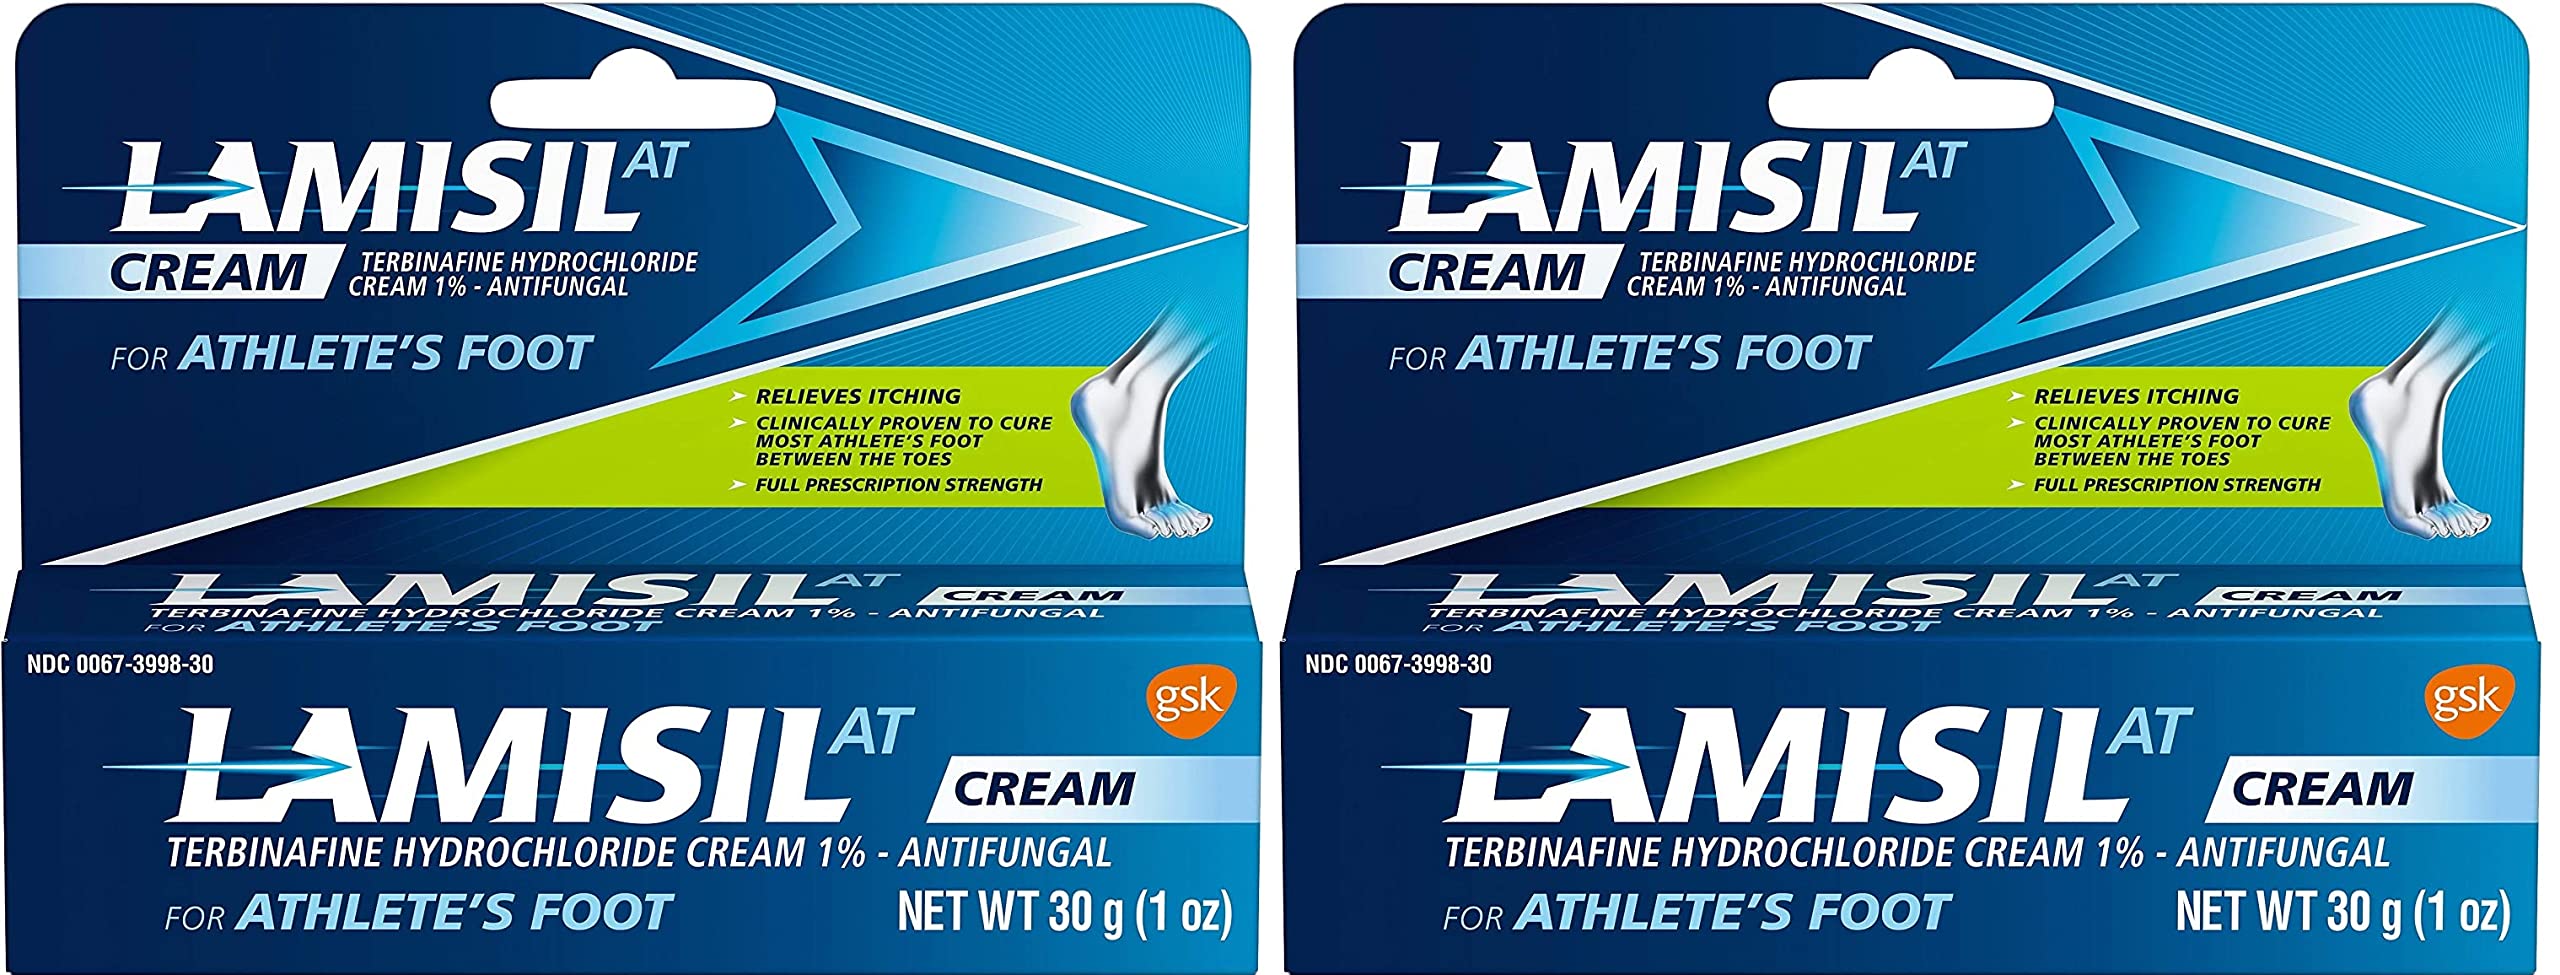 Lamisil at Cream 1 Ounce (Pack of 2)